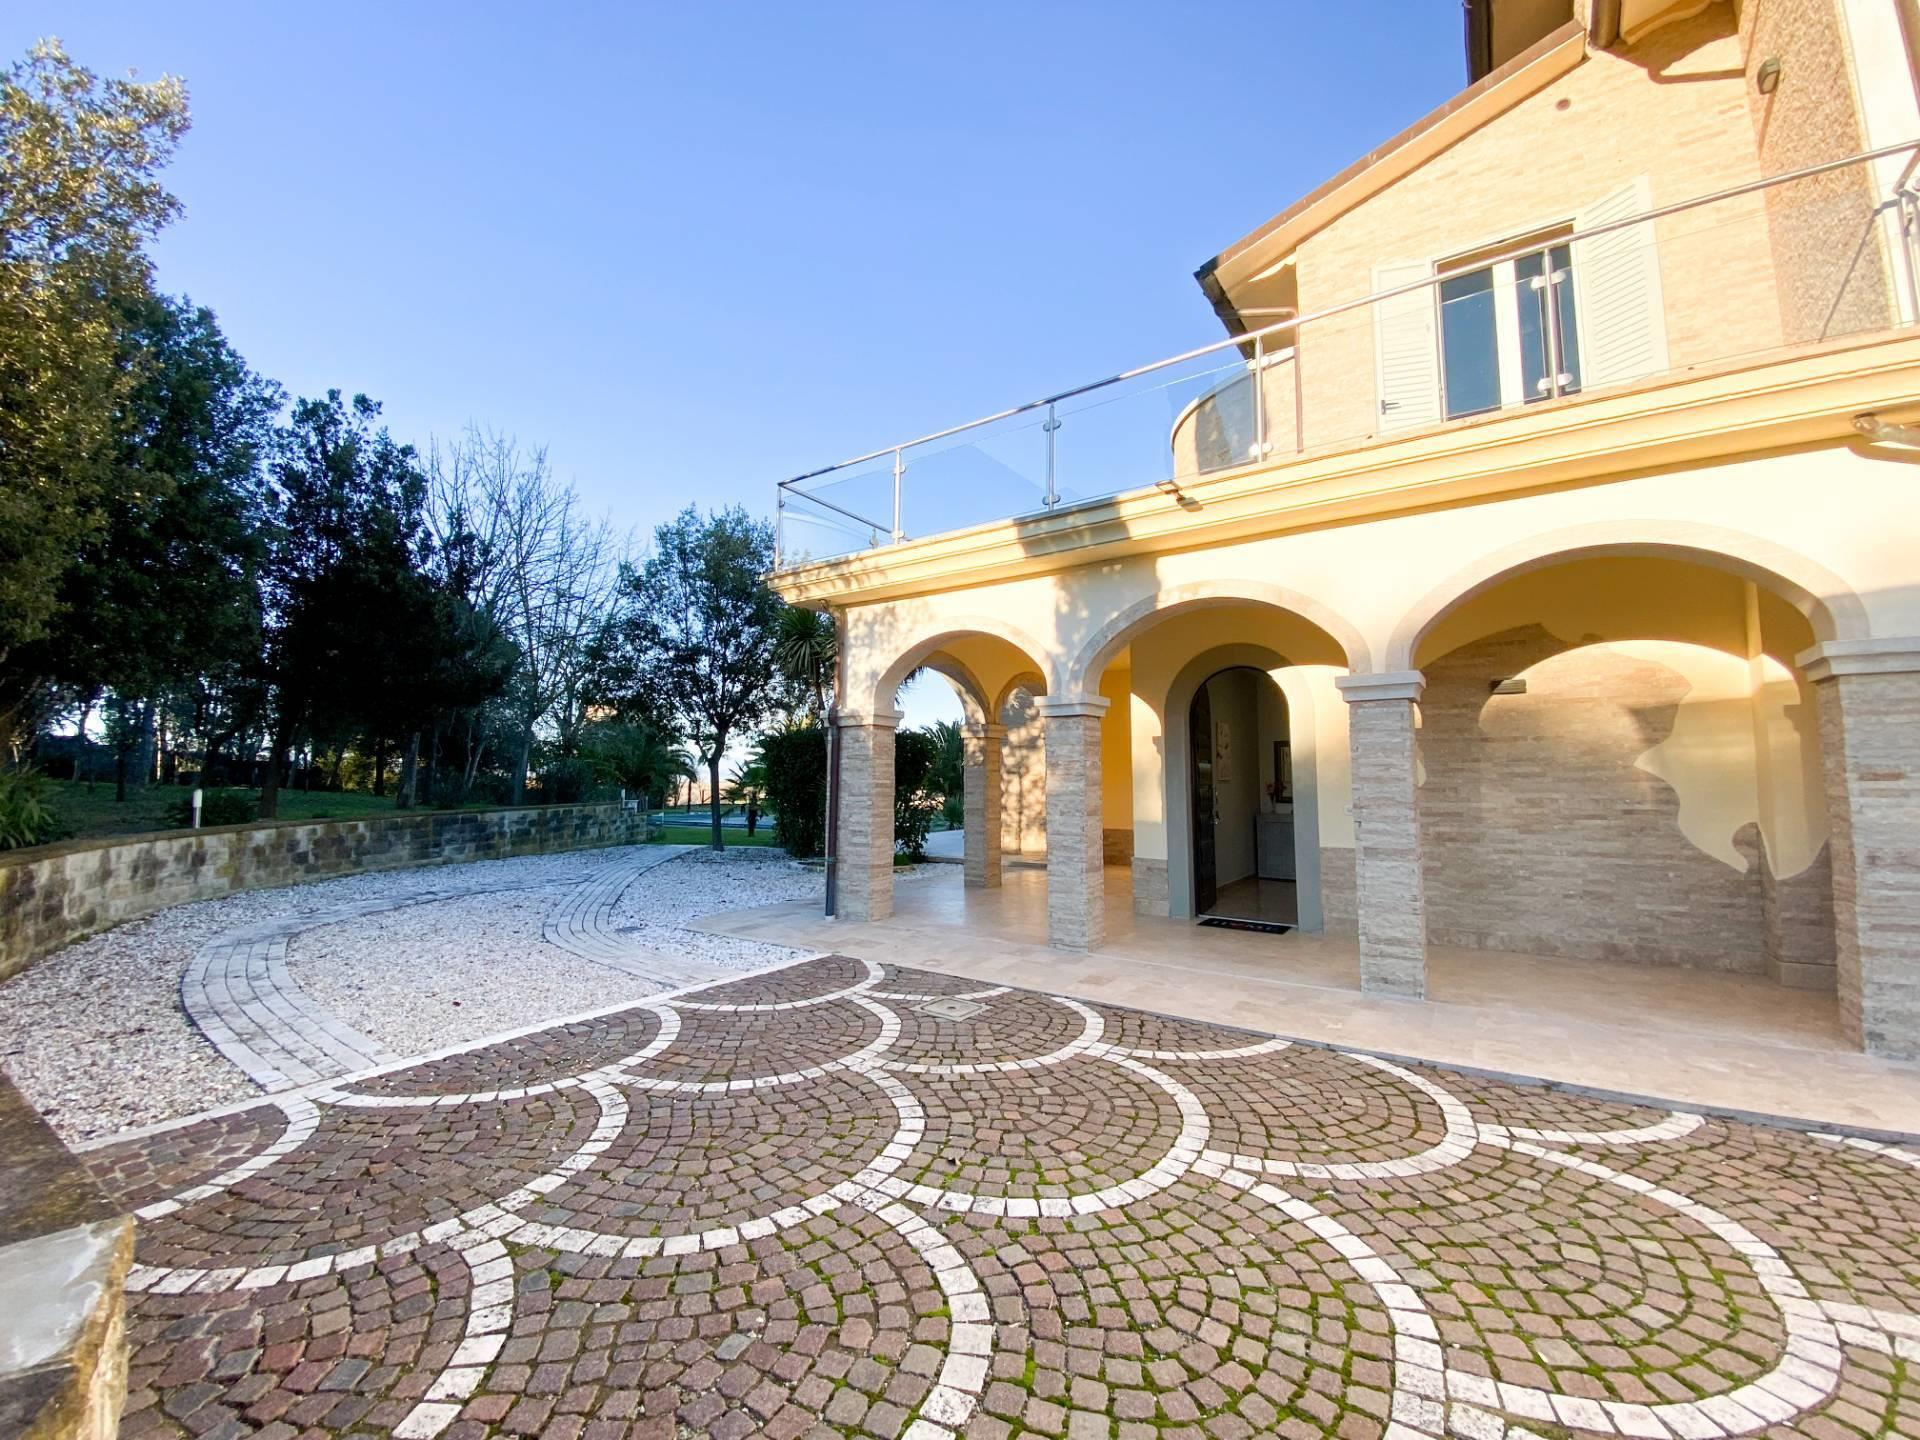 Villa of about 300 square meters with garden and swimming pool overlooking the Val di Chiana